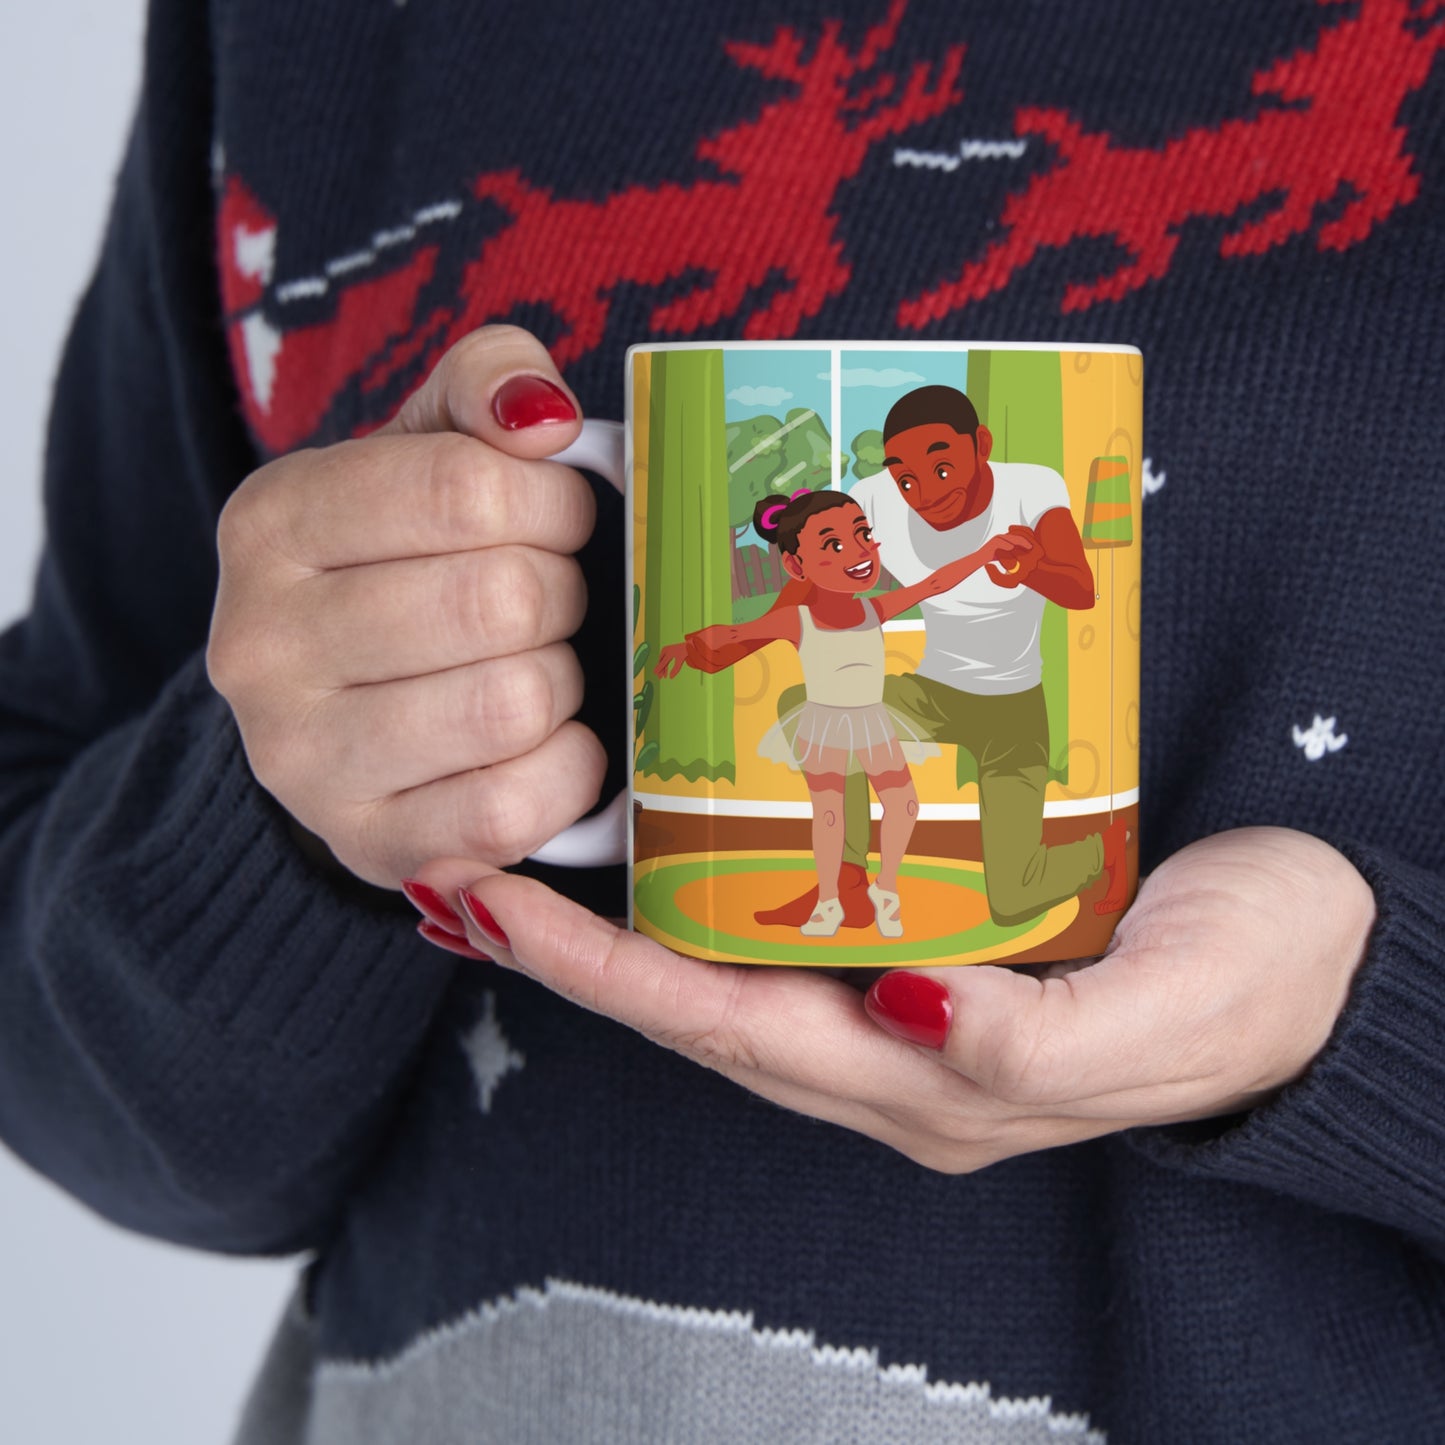 “BEST DAD EVER” on one side and a dad teaching his child to dance. Part of several mugs to choose from depending on what resonates with you.